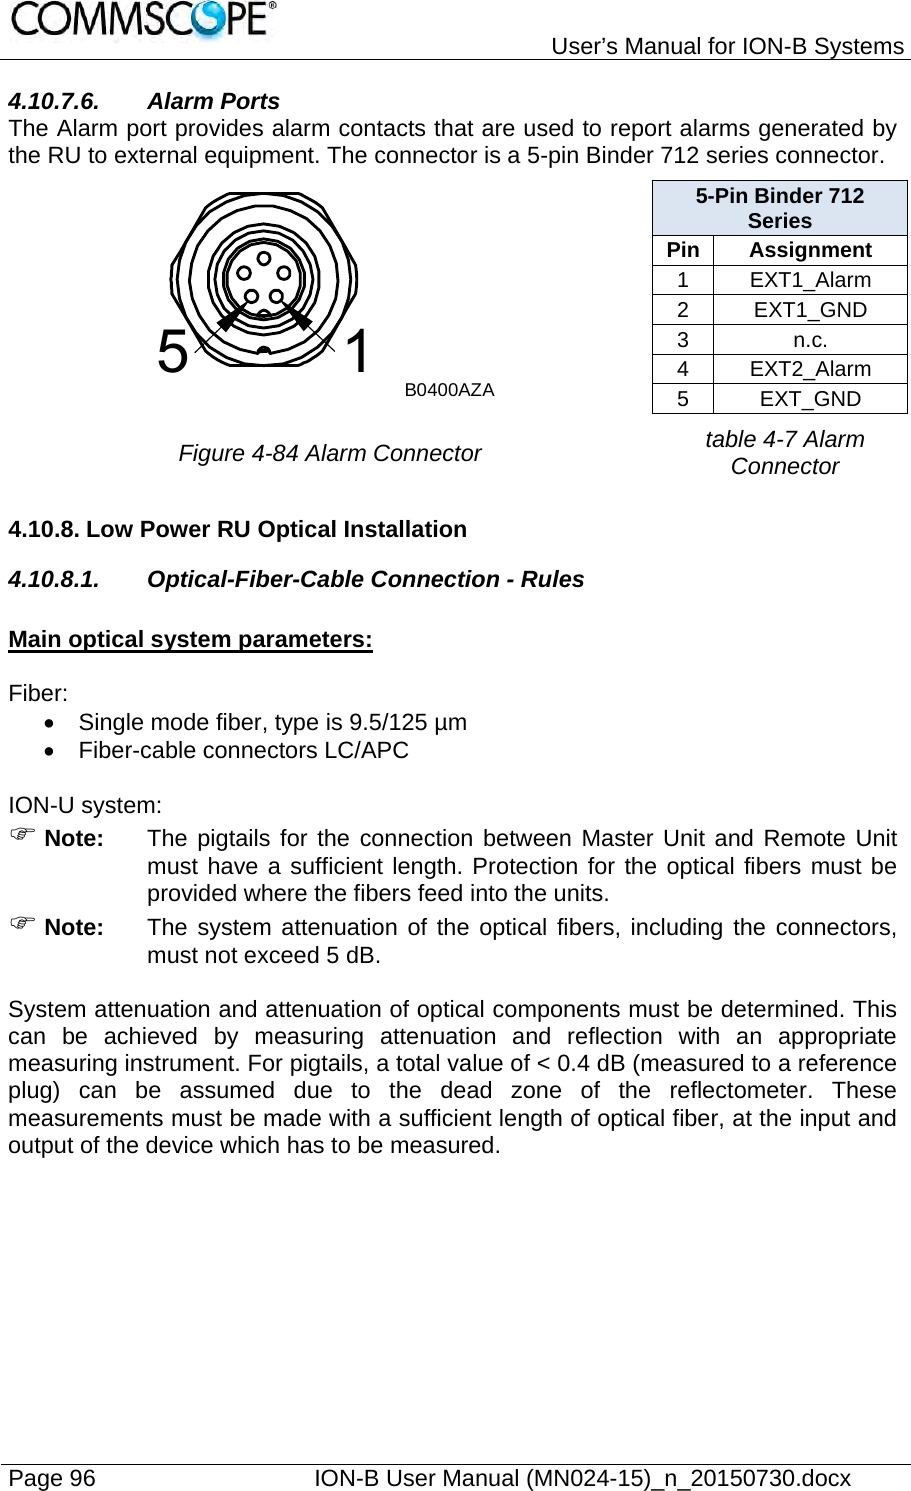   User’s Manual for ION-B Systems Page 96    ION-B User Manual (MN024-15)_n_20150730.docx  4.10.7.6. Alarm Ports The Alarm port provides alarm contacts that are used to report alarms generated by the RU to external equipment. The connector is a 5-pin Binder 712 series connector.  5-Pin Binder 712 Series Pin Assignment 1 EXT1_Alarm 2 EXT1_GND 3 n.c. 4 EXT2_Alarm 5 EXT_GND  Figure 4-84 Alarm Connector table 4-7 Alarm Connector 4.10.8. Low Power RU Optical Installation 4.10.8.1.  Optical-Fiber-Cable Connection - Rules  Main optical system parameters:  Fiber:   Single mode fiber, type is 9.5/125 µm   Fiber-cable connectors LC/APC  ION-U system:  Note:  The pigtails for the connection between Master Unit and Remote Unit must have a sufficient length. Protection for the optical fibers must be provided where the fibers feed into the units.   Note:  The system attenuation of the optical fibers, including the connectors, must not exceed 5 dB.  System attenuation and attenuation of optical components must be determined. This can be achieved by measuring attenuation and reflection with an appropriate measuring instrument. For pigtails, a total value of &lt; 0.4 dB (measured to a reference plug) can be assumed due to the dead zone of the reflectometer. These measurements must be made with a sufficient length of optical fiber, at the input and output of the device which has to be measured.  51B0400AZA